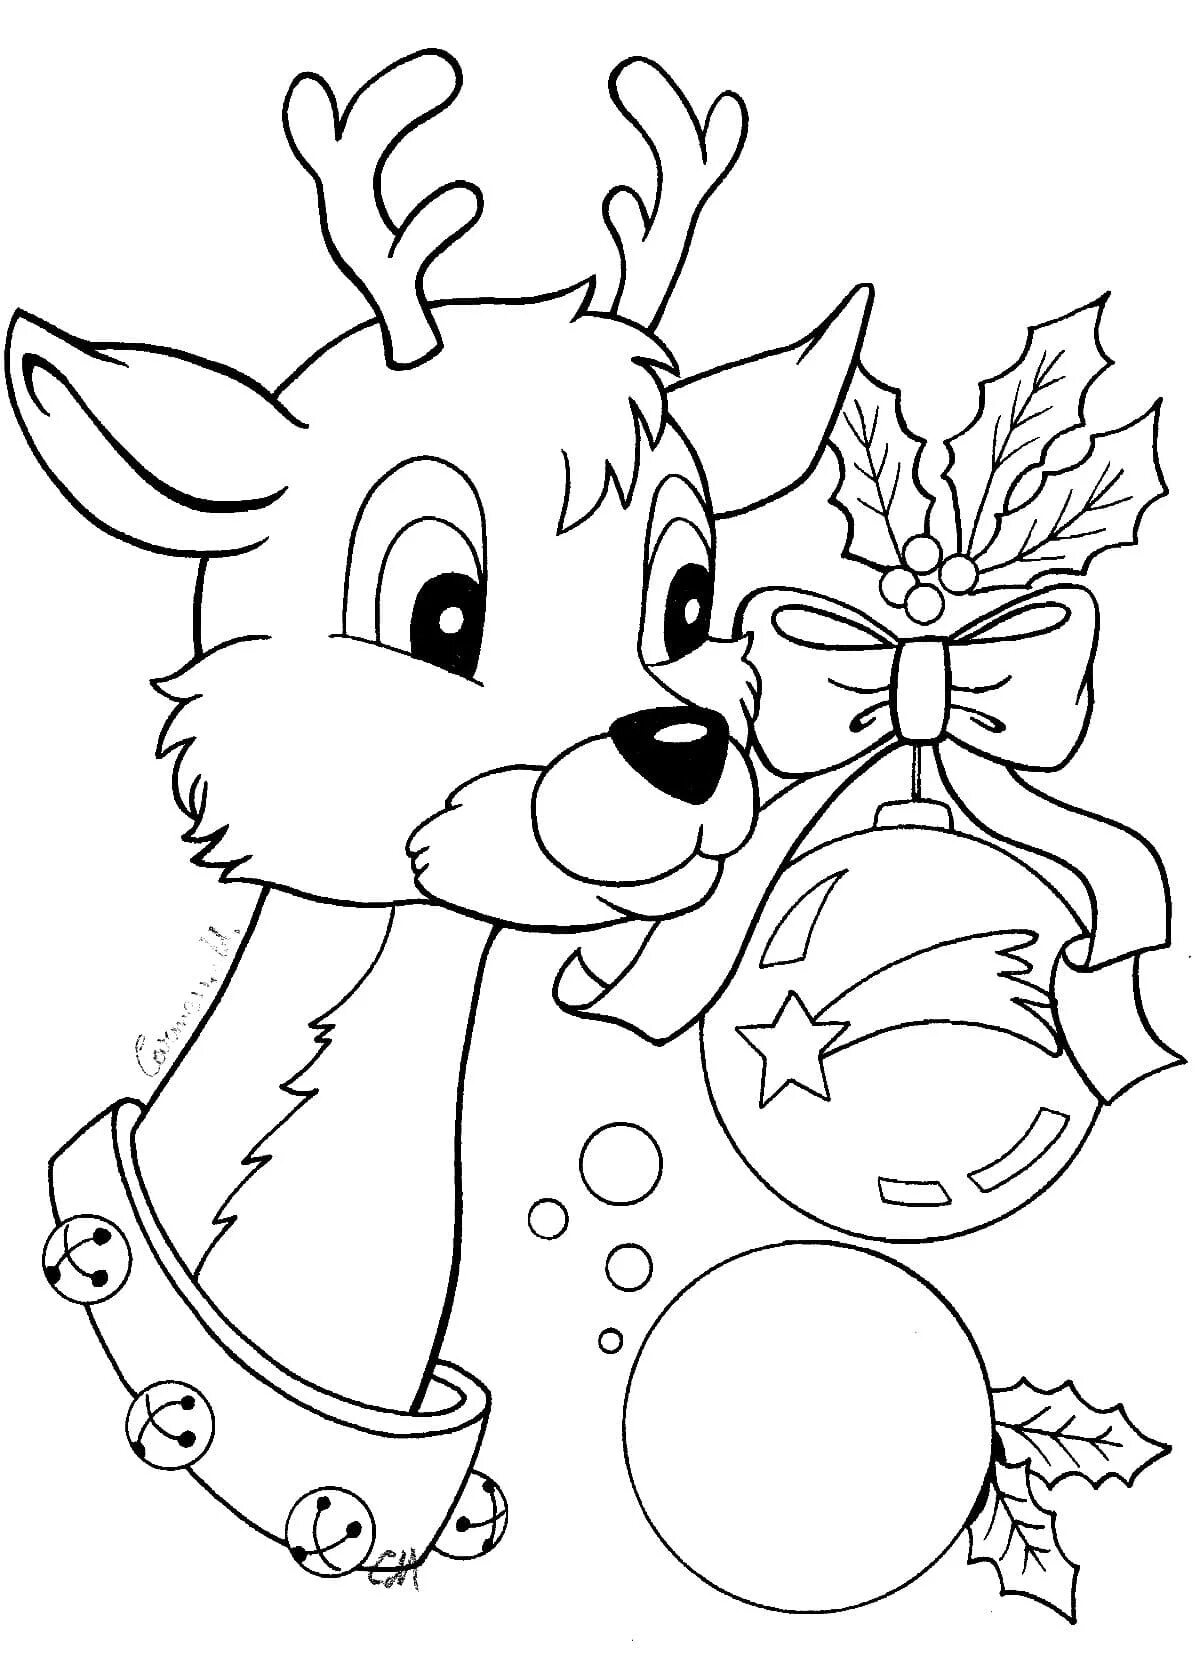 Colorfully decorated Christmas coloring book